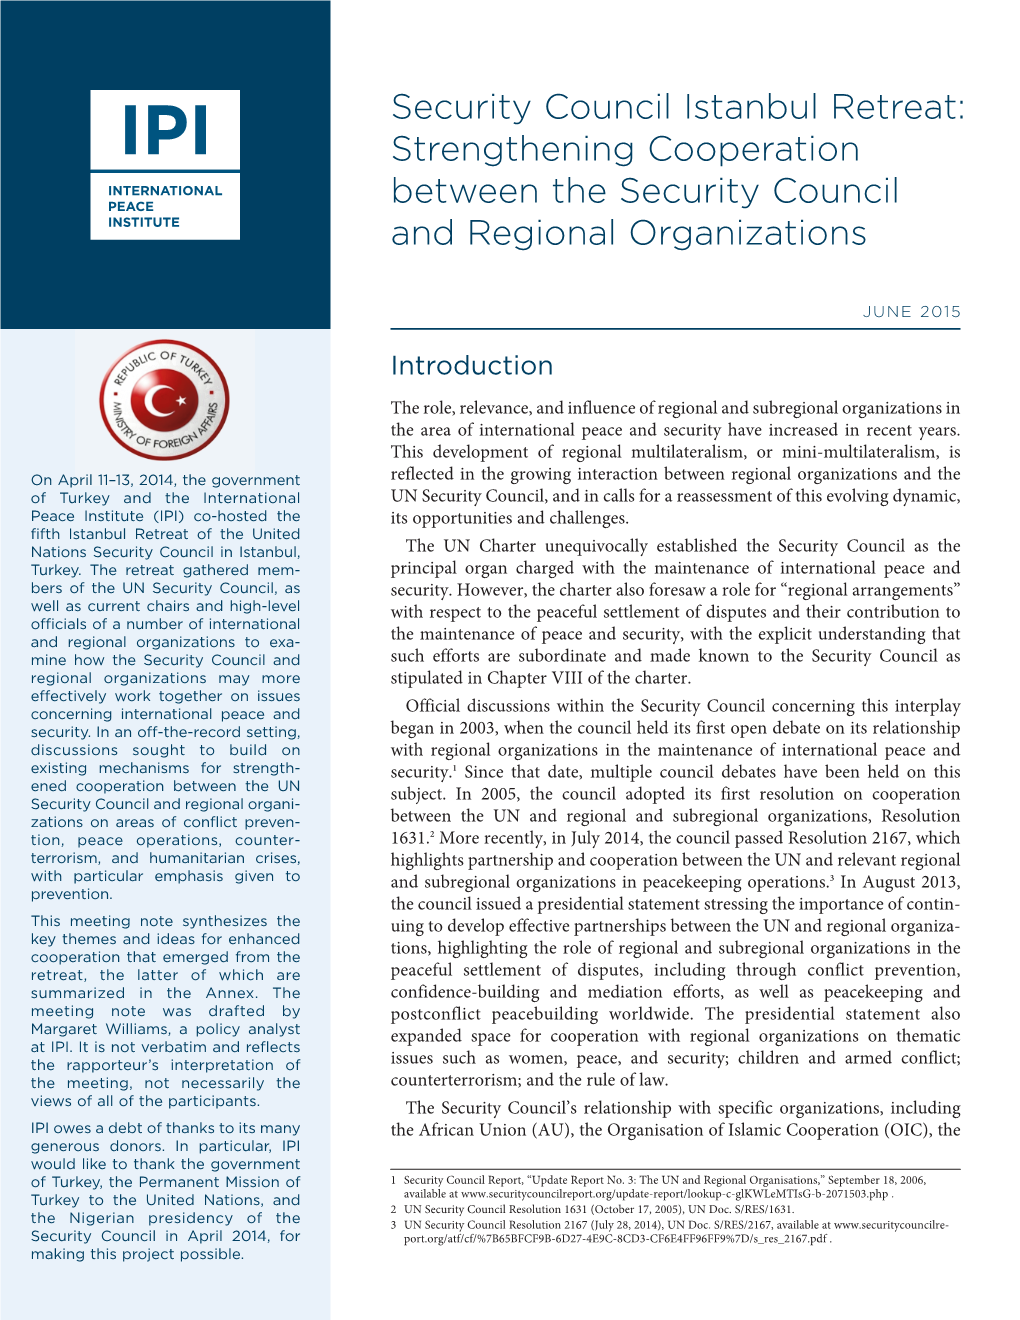 Security Council Istanbul Retreat: Strengthening Cooperation Between the Security Council and Regional Organizations